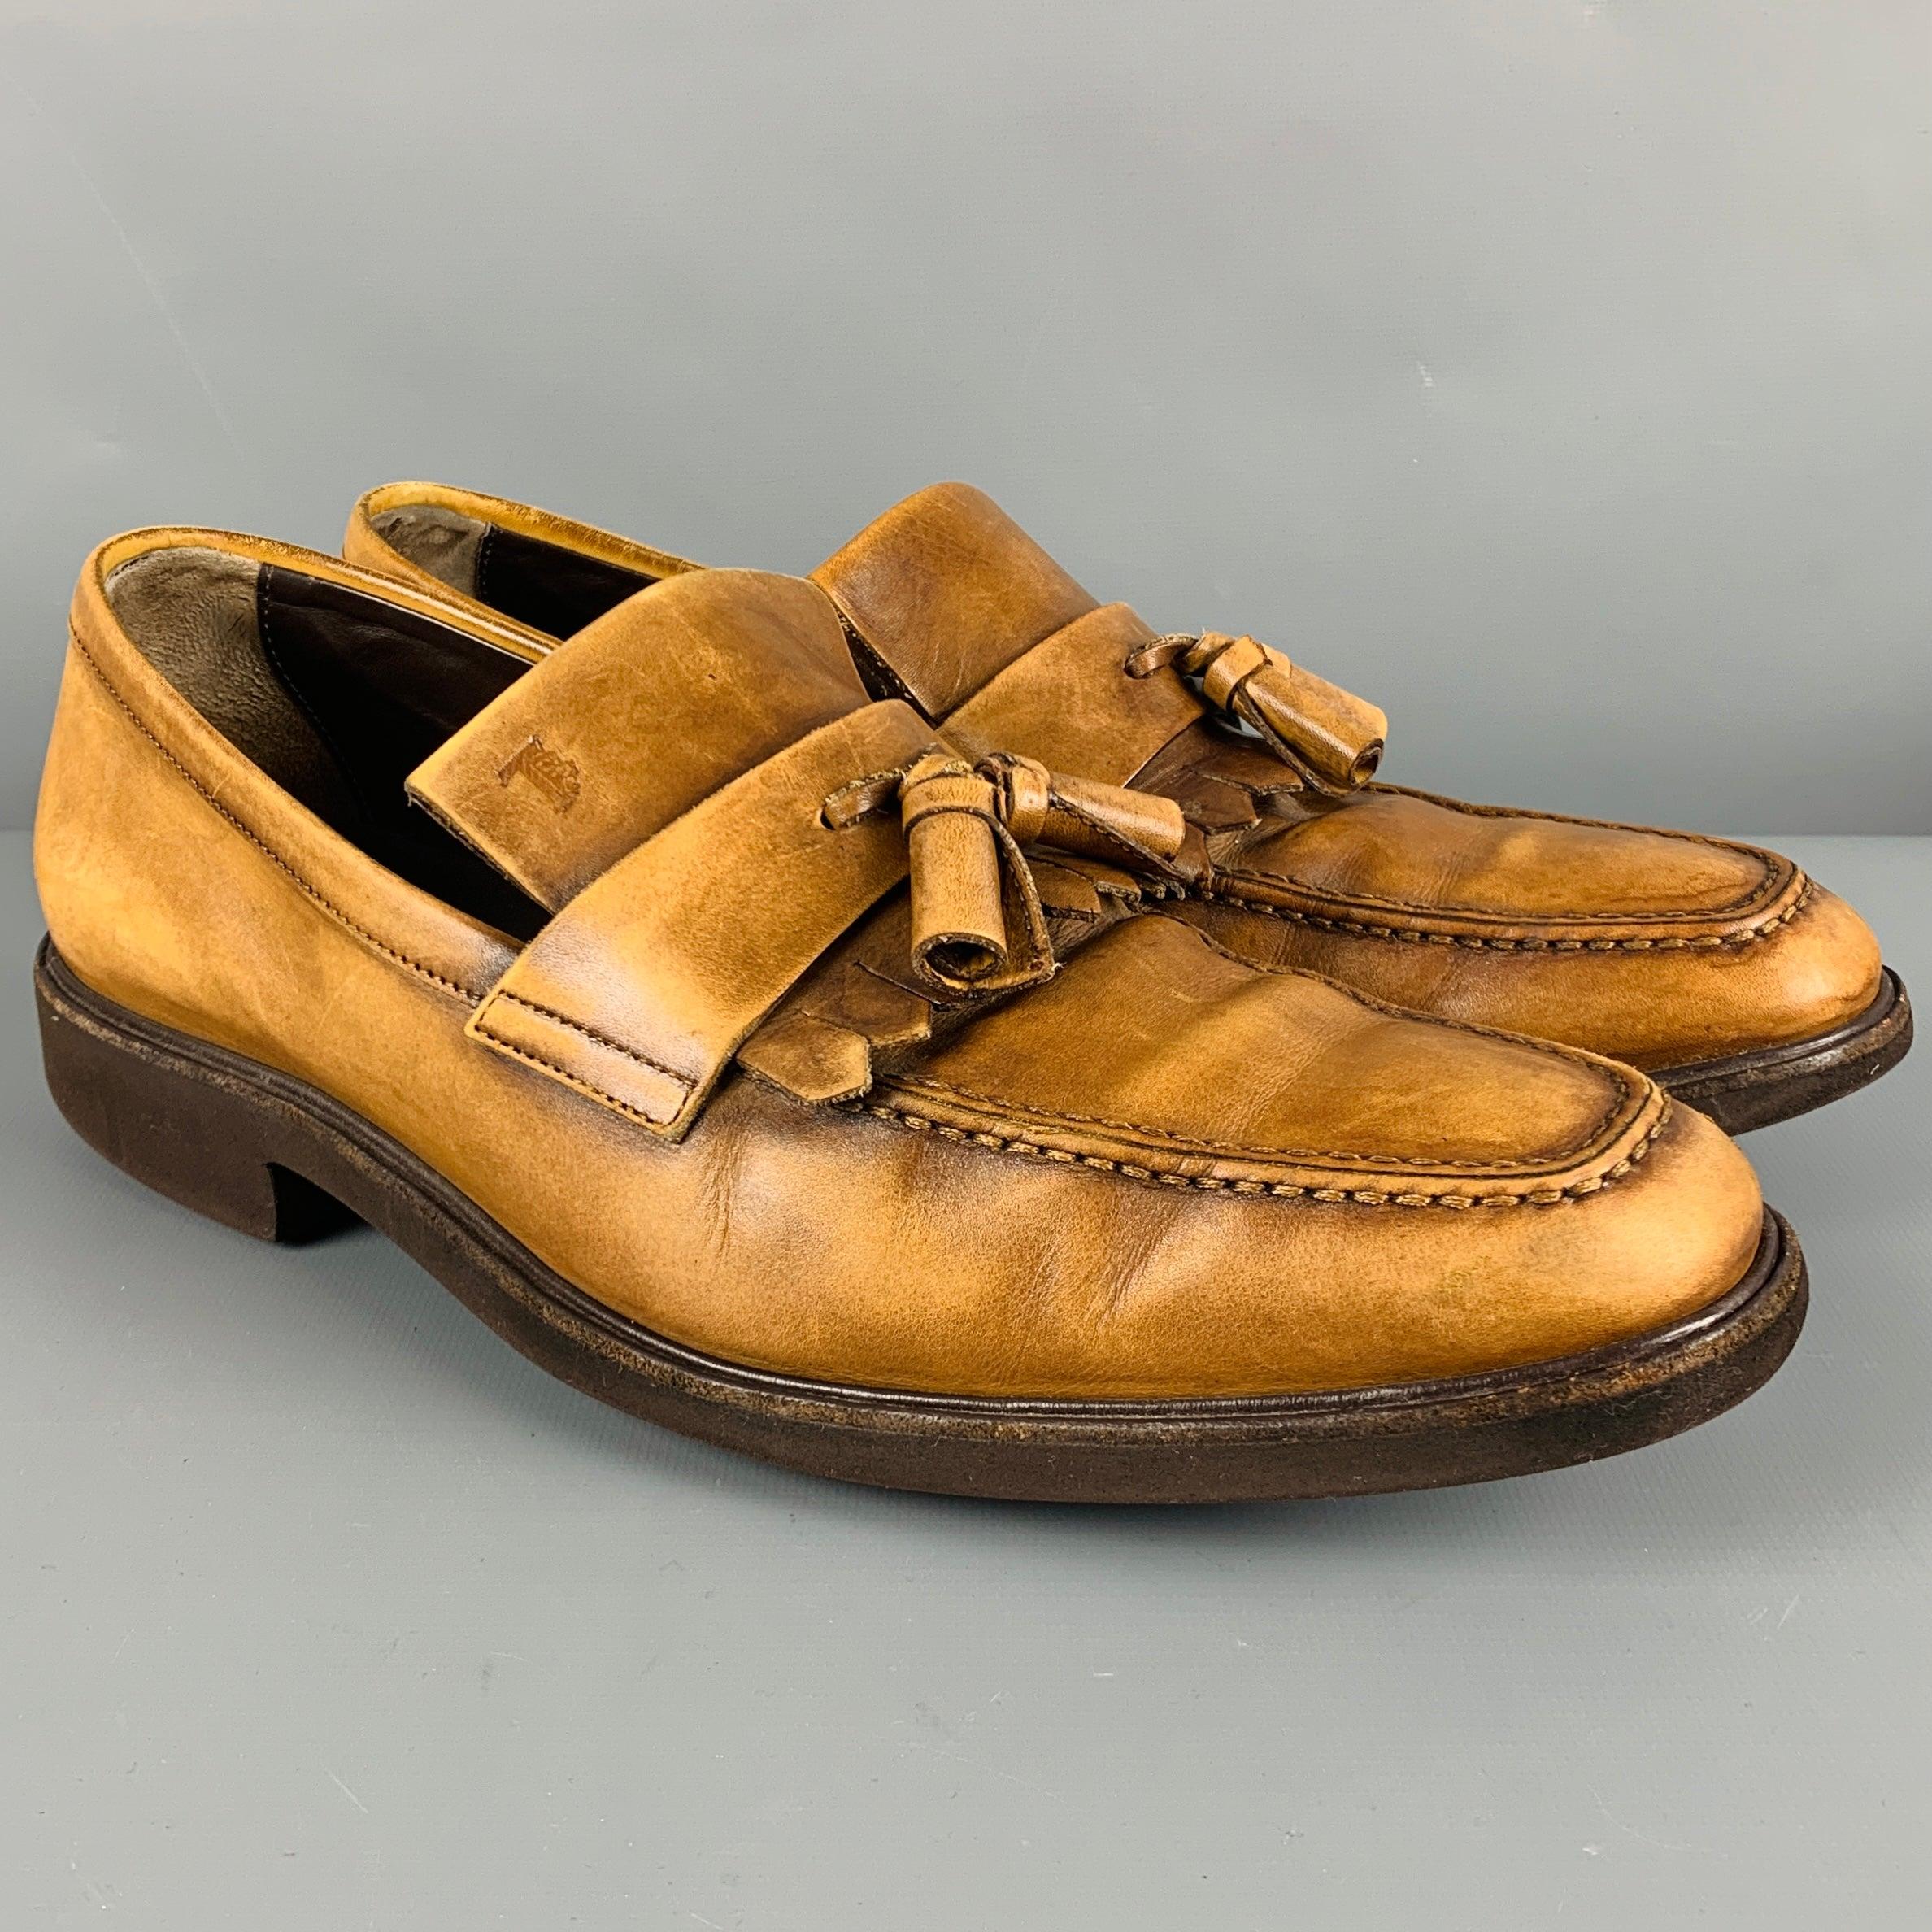 TOD'S loafers
in a brown leather fabric featuring a distressed style, fringe and tassels details, and slip on closure. Made in Italy.Excellent Pre-Owned Condition. 

Marked:   8Outsole: 11.5 inches  x 4 inches 
  
  
 
Reference No.: